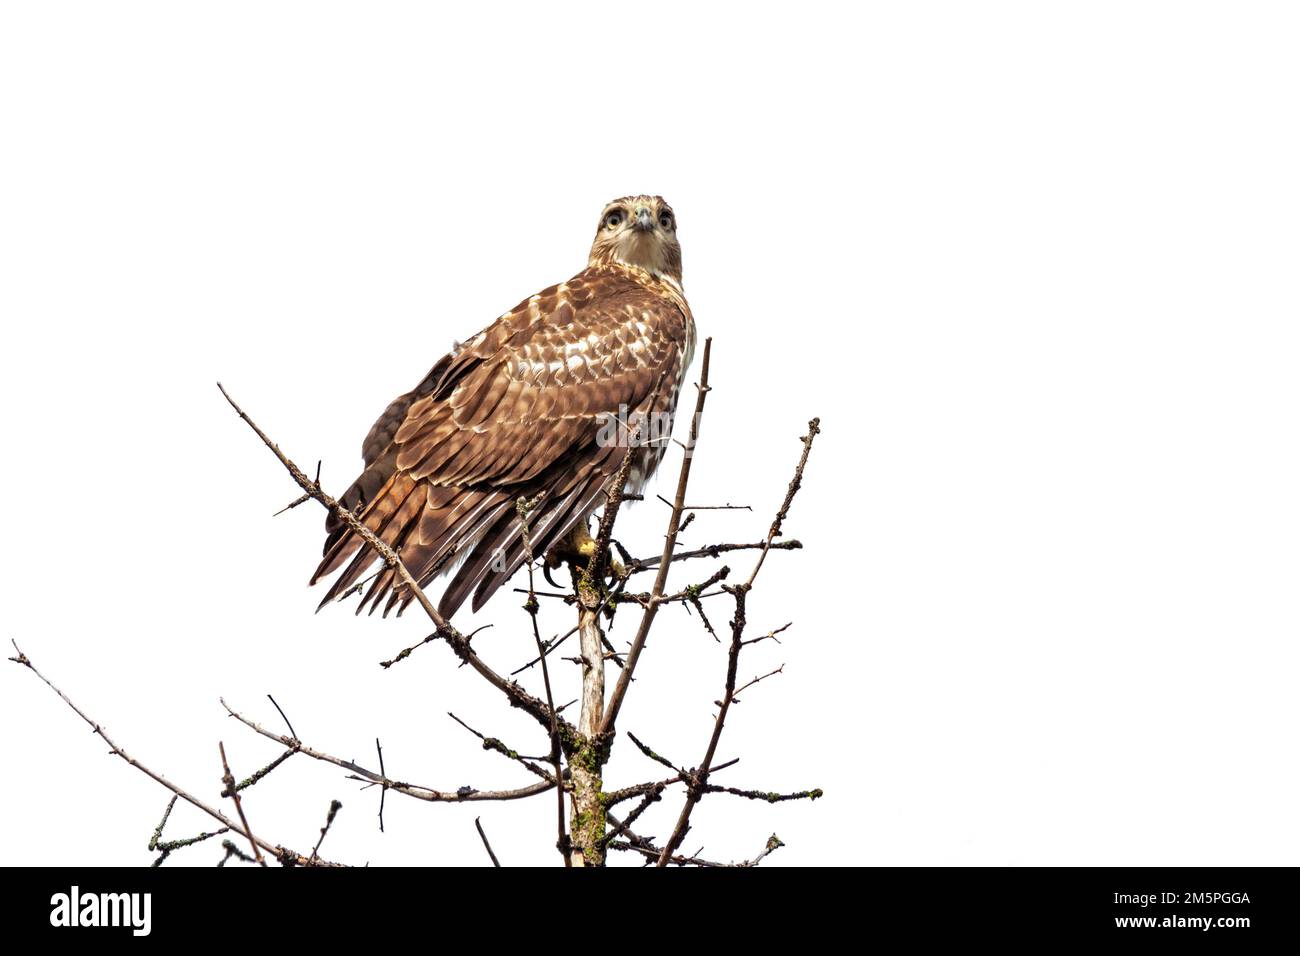 A red-tailed hawk perched on top of a pine tree with a white background background Stock Photo